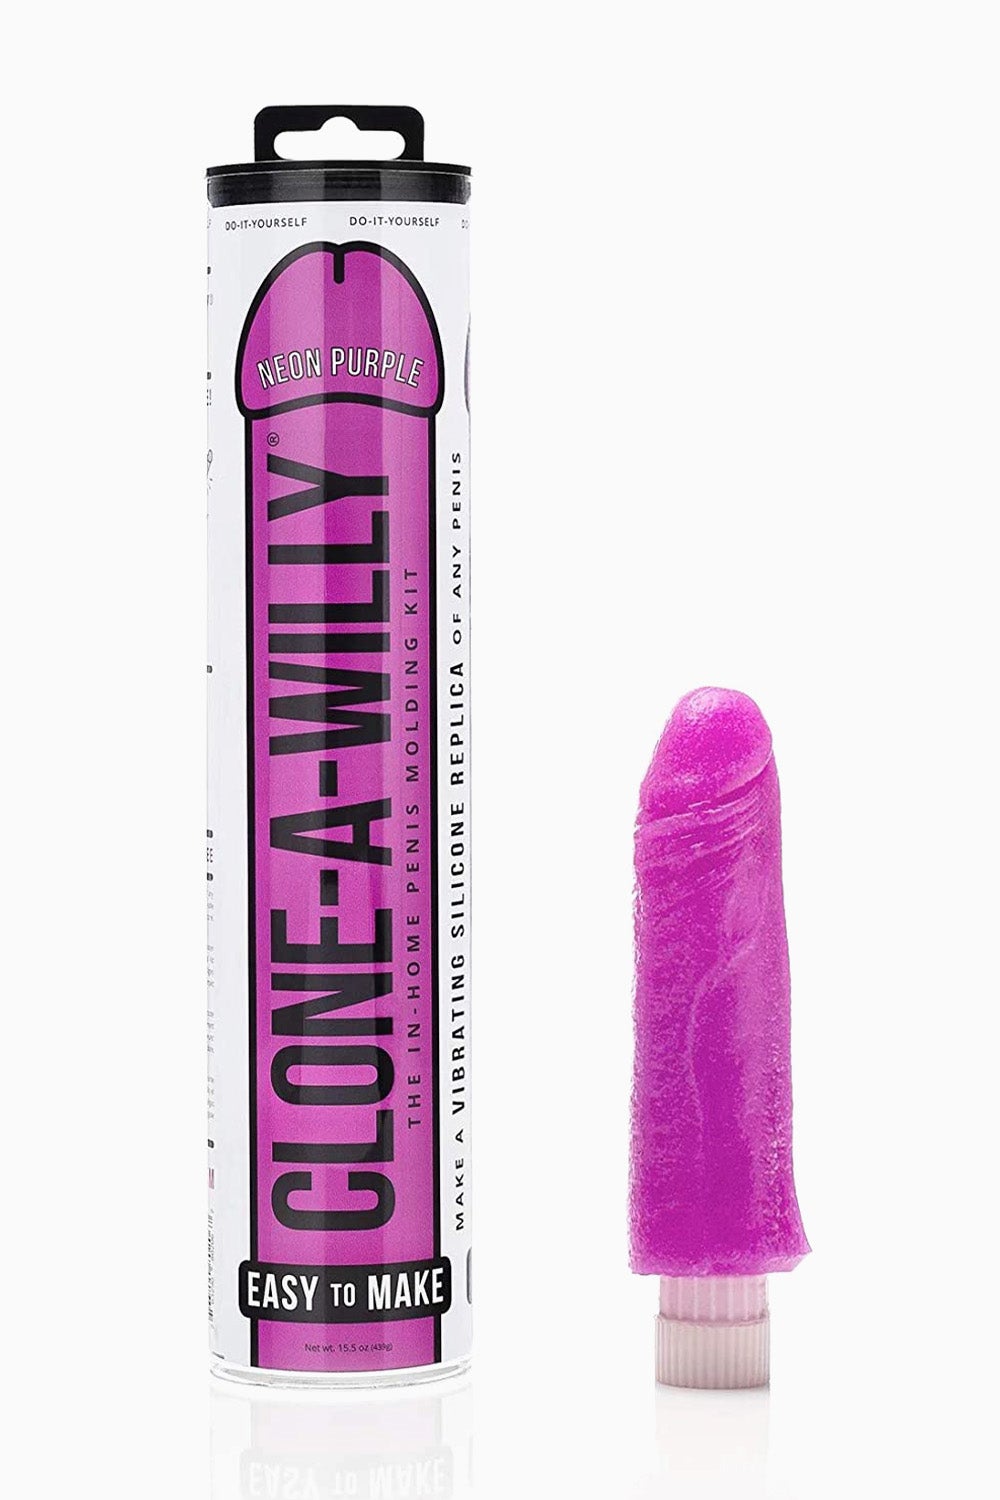 Clone-A-Willy Vibrator Moulding Kit - Purple